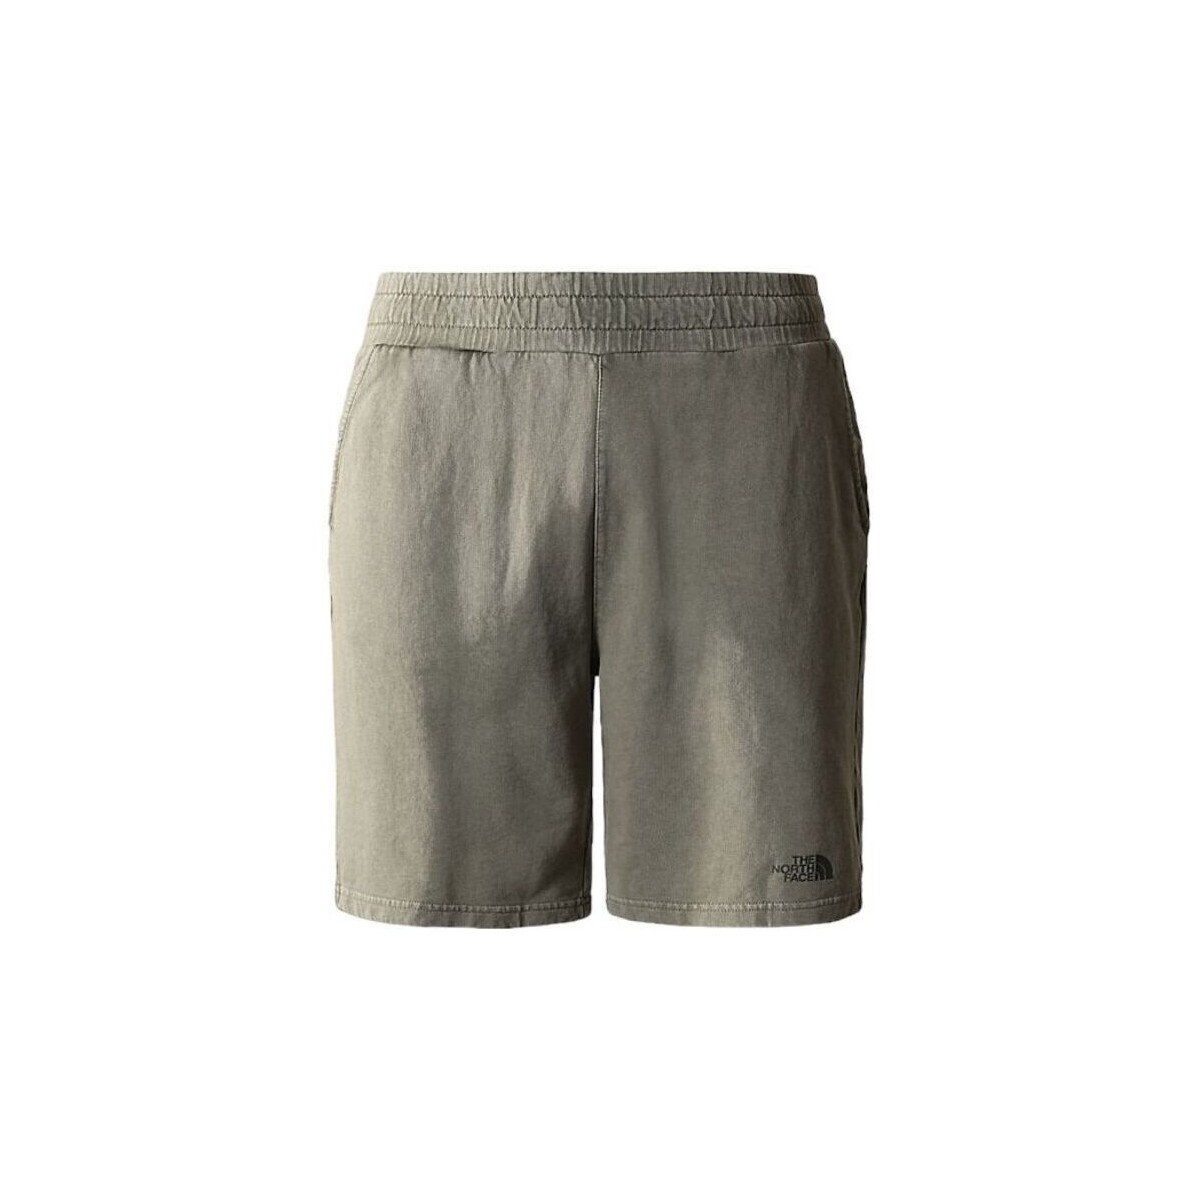 Vêtements Homme Shorts / Bermudas The North Face Shorts Heritage Dye Homme New Taupe Green Gris